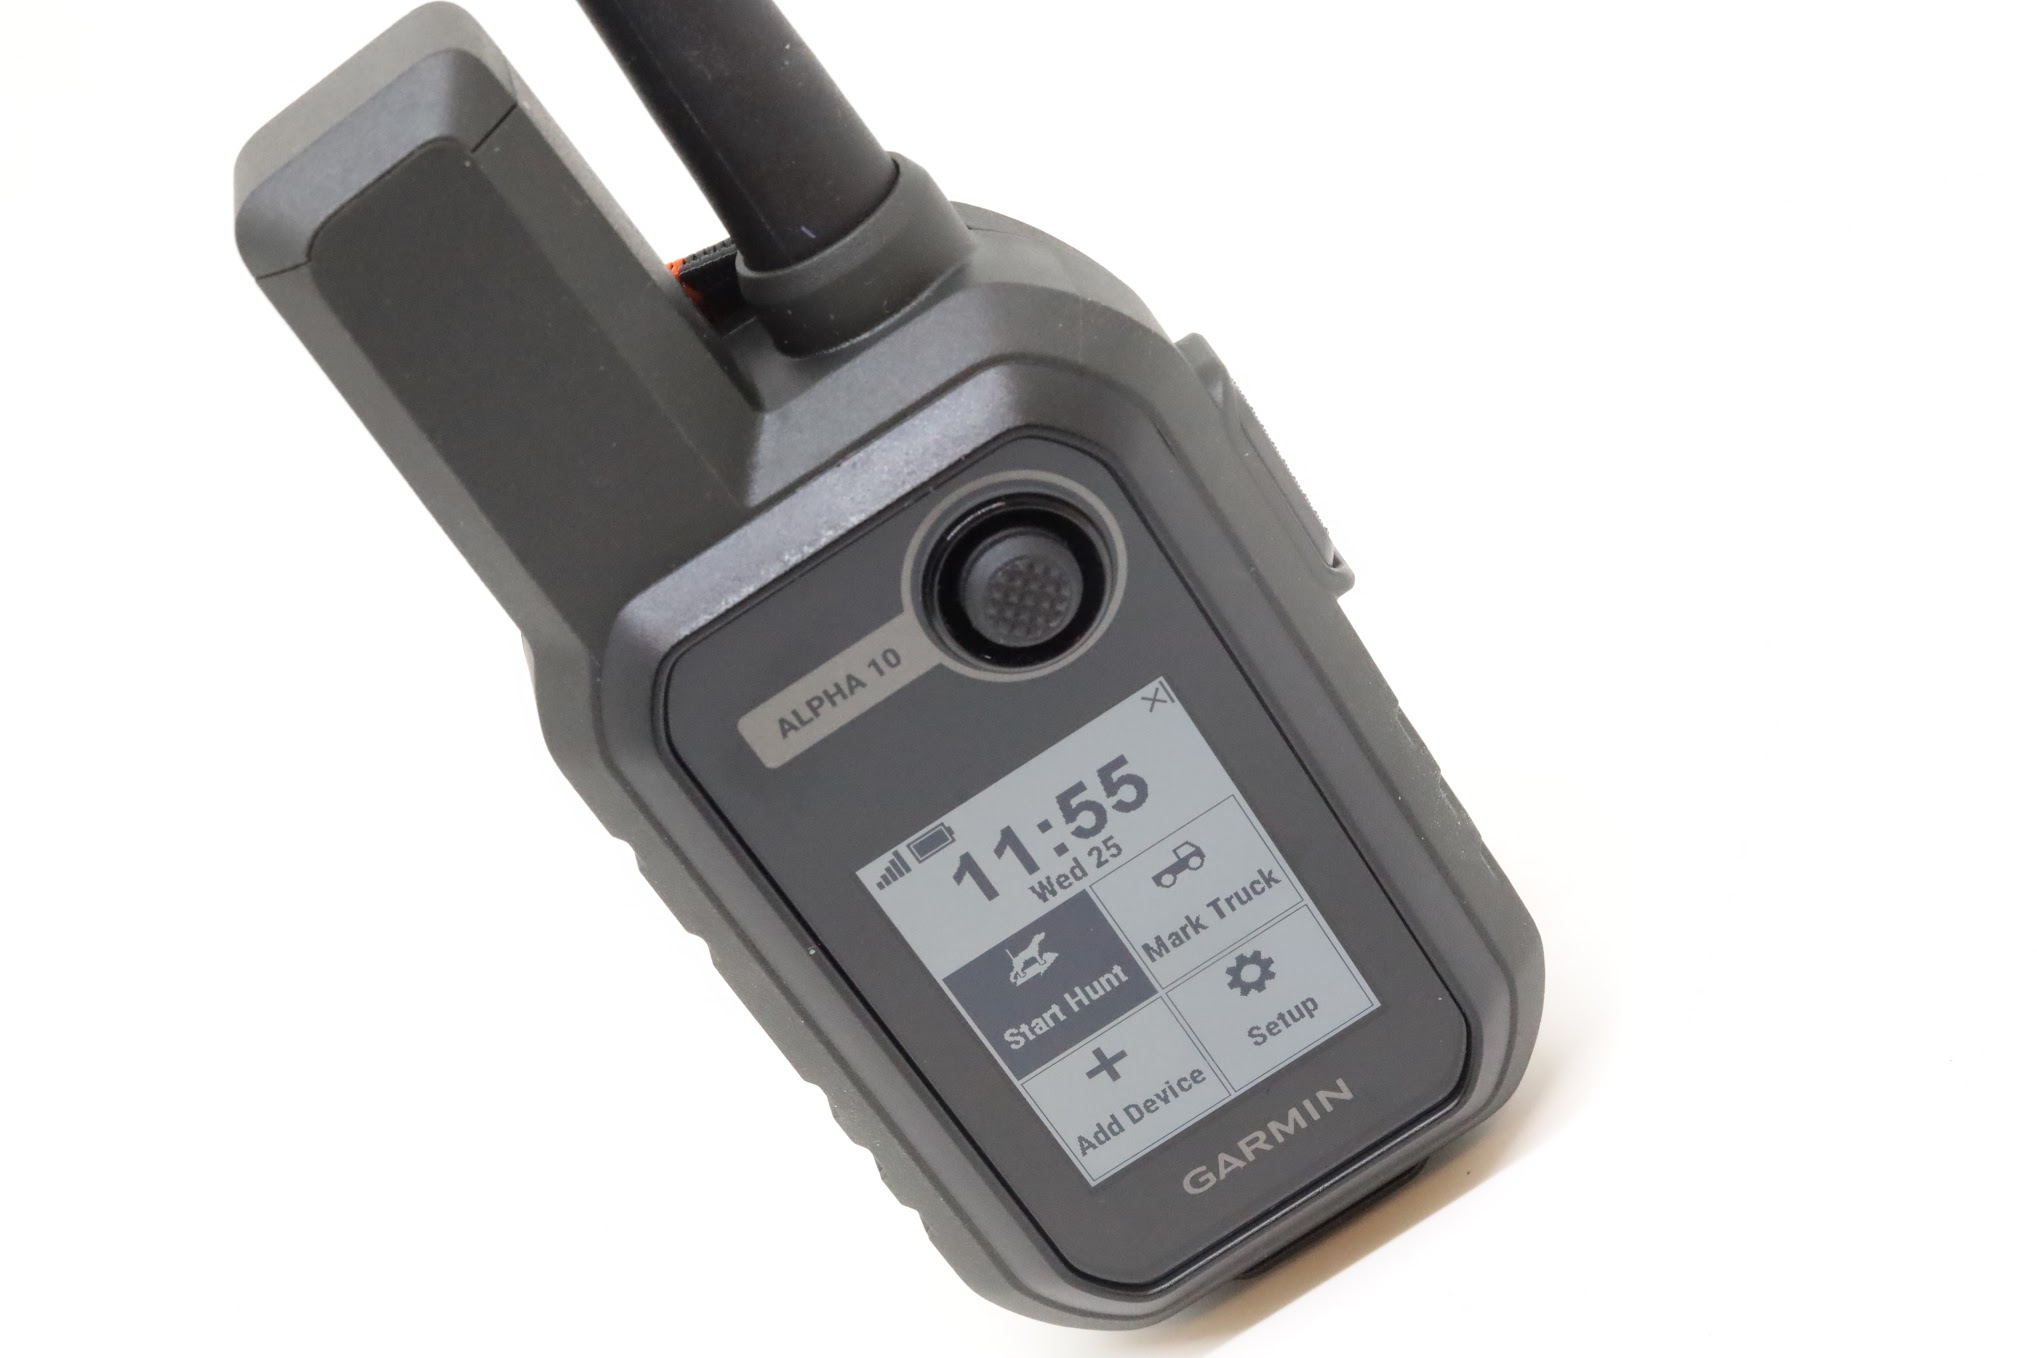 The Garmin Alpha 10 handheld device on a white background